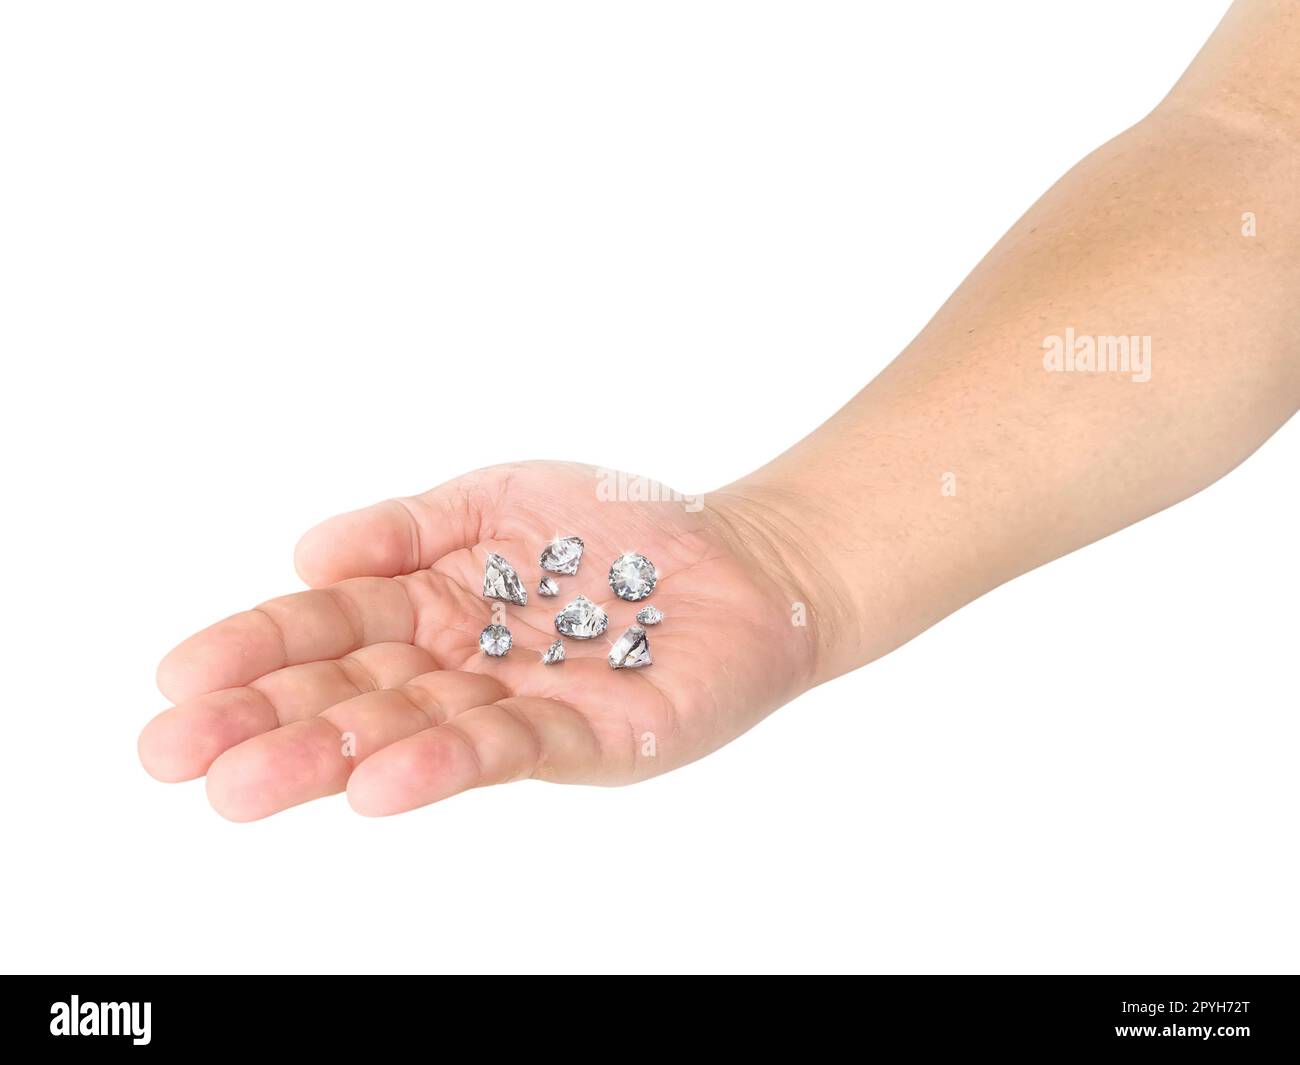 Diamonds of different cuts and sizes in open palm on white background Stock Photo